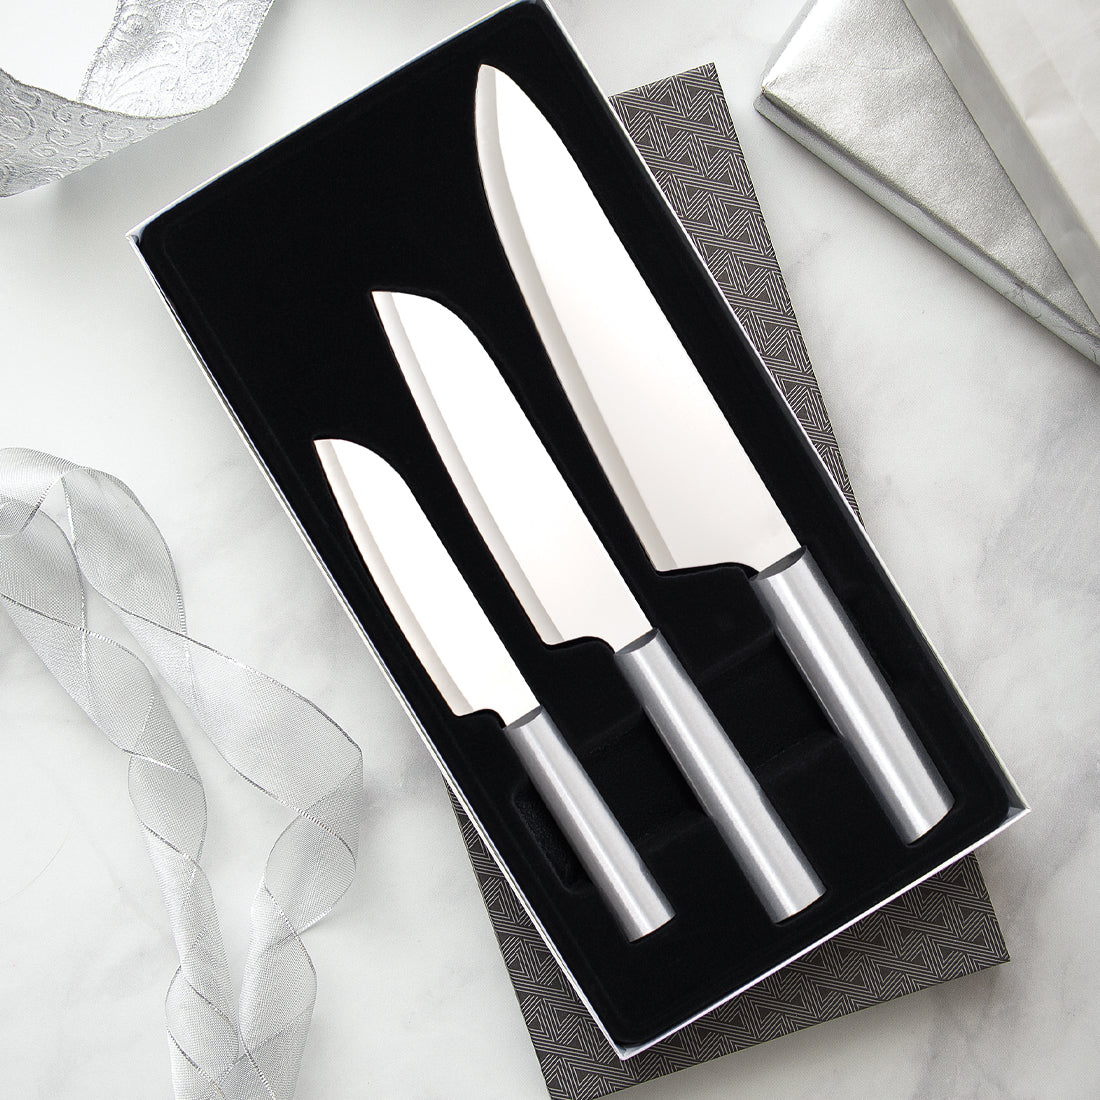  Rada Cutlery Cooking Essentials Knife Starter Gift 3 Piece Set  Resin Stainless Steel, 8 7/8 Inches, Black Handle: Block Knife Sets: Home &  Kitchen